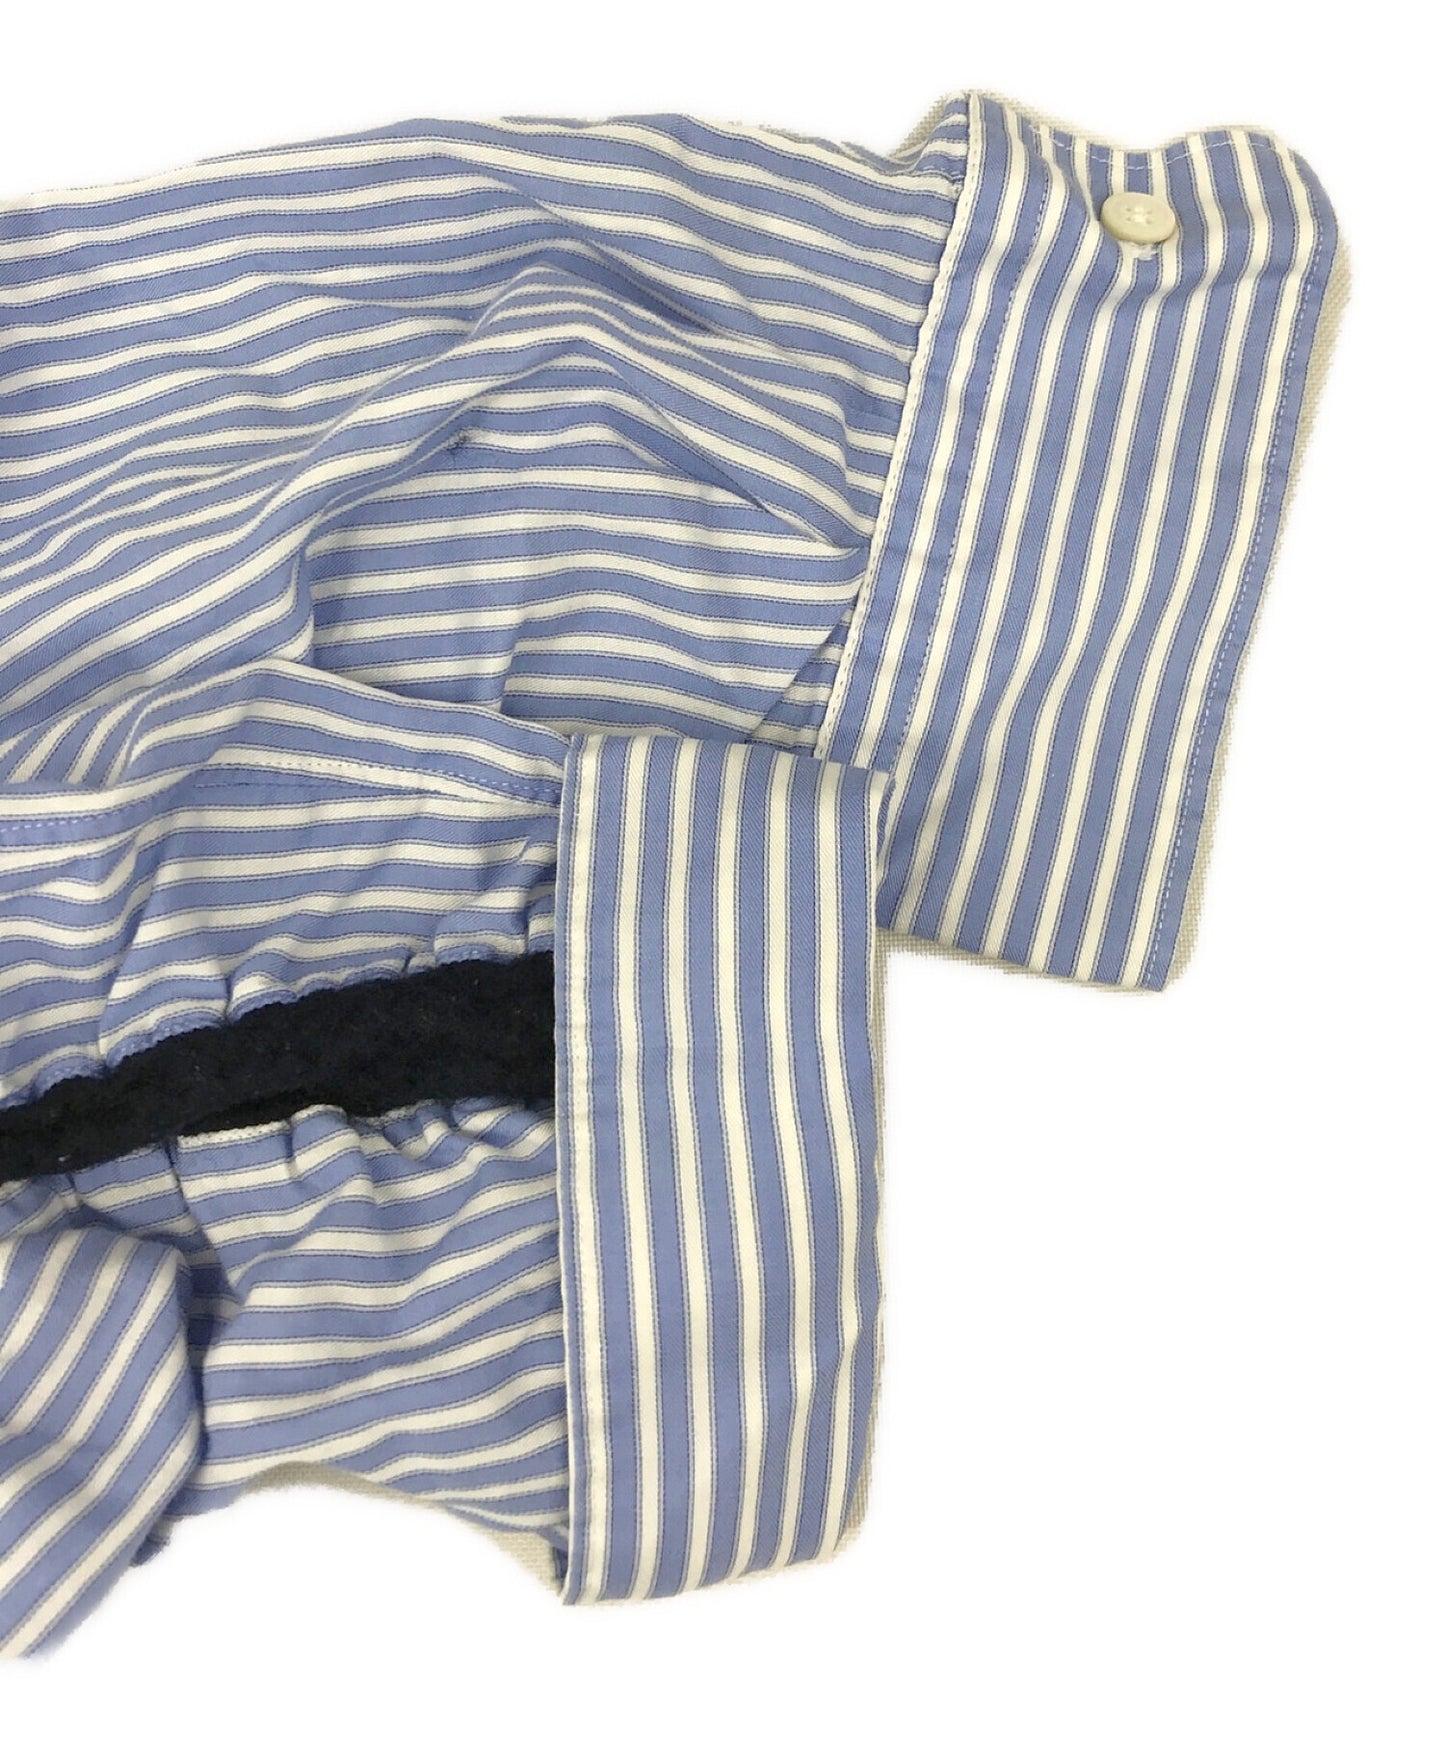 Comme des Garcons Homme Wool Switching Packing Stripe Shirt HH-B028